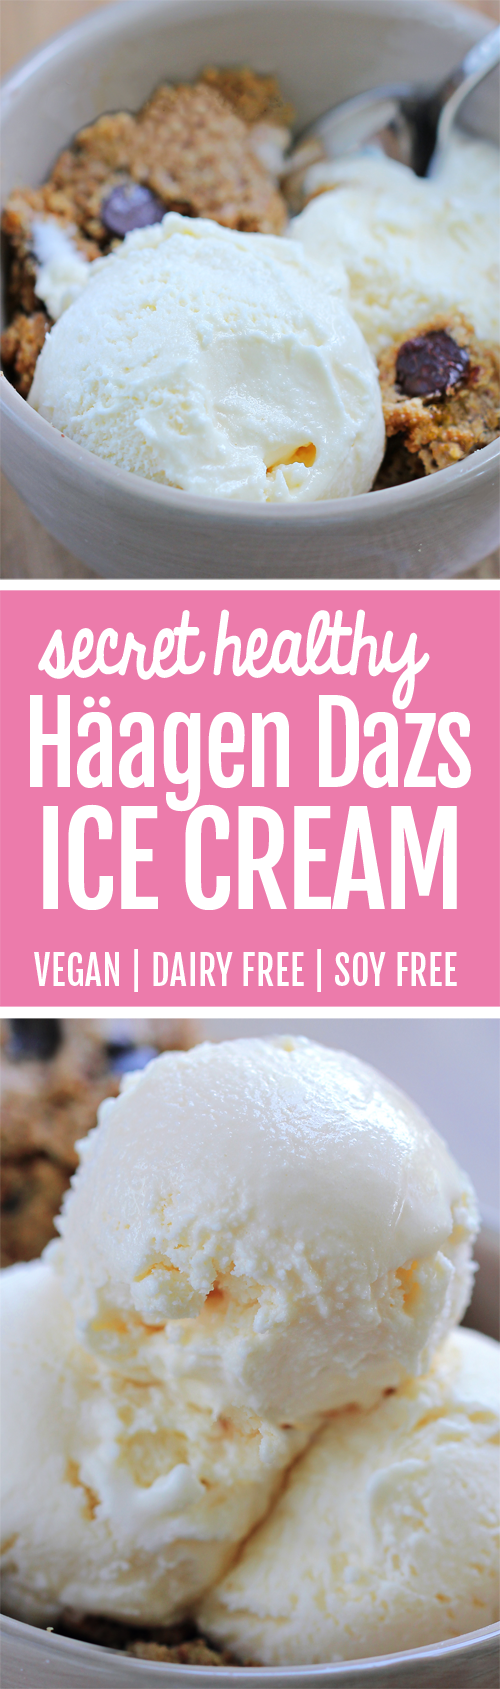 Homemade EASY ice cream recipe that has no corn syrup and is vegan!